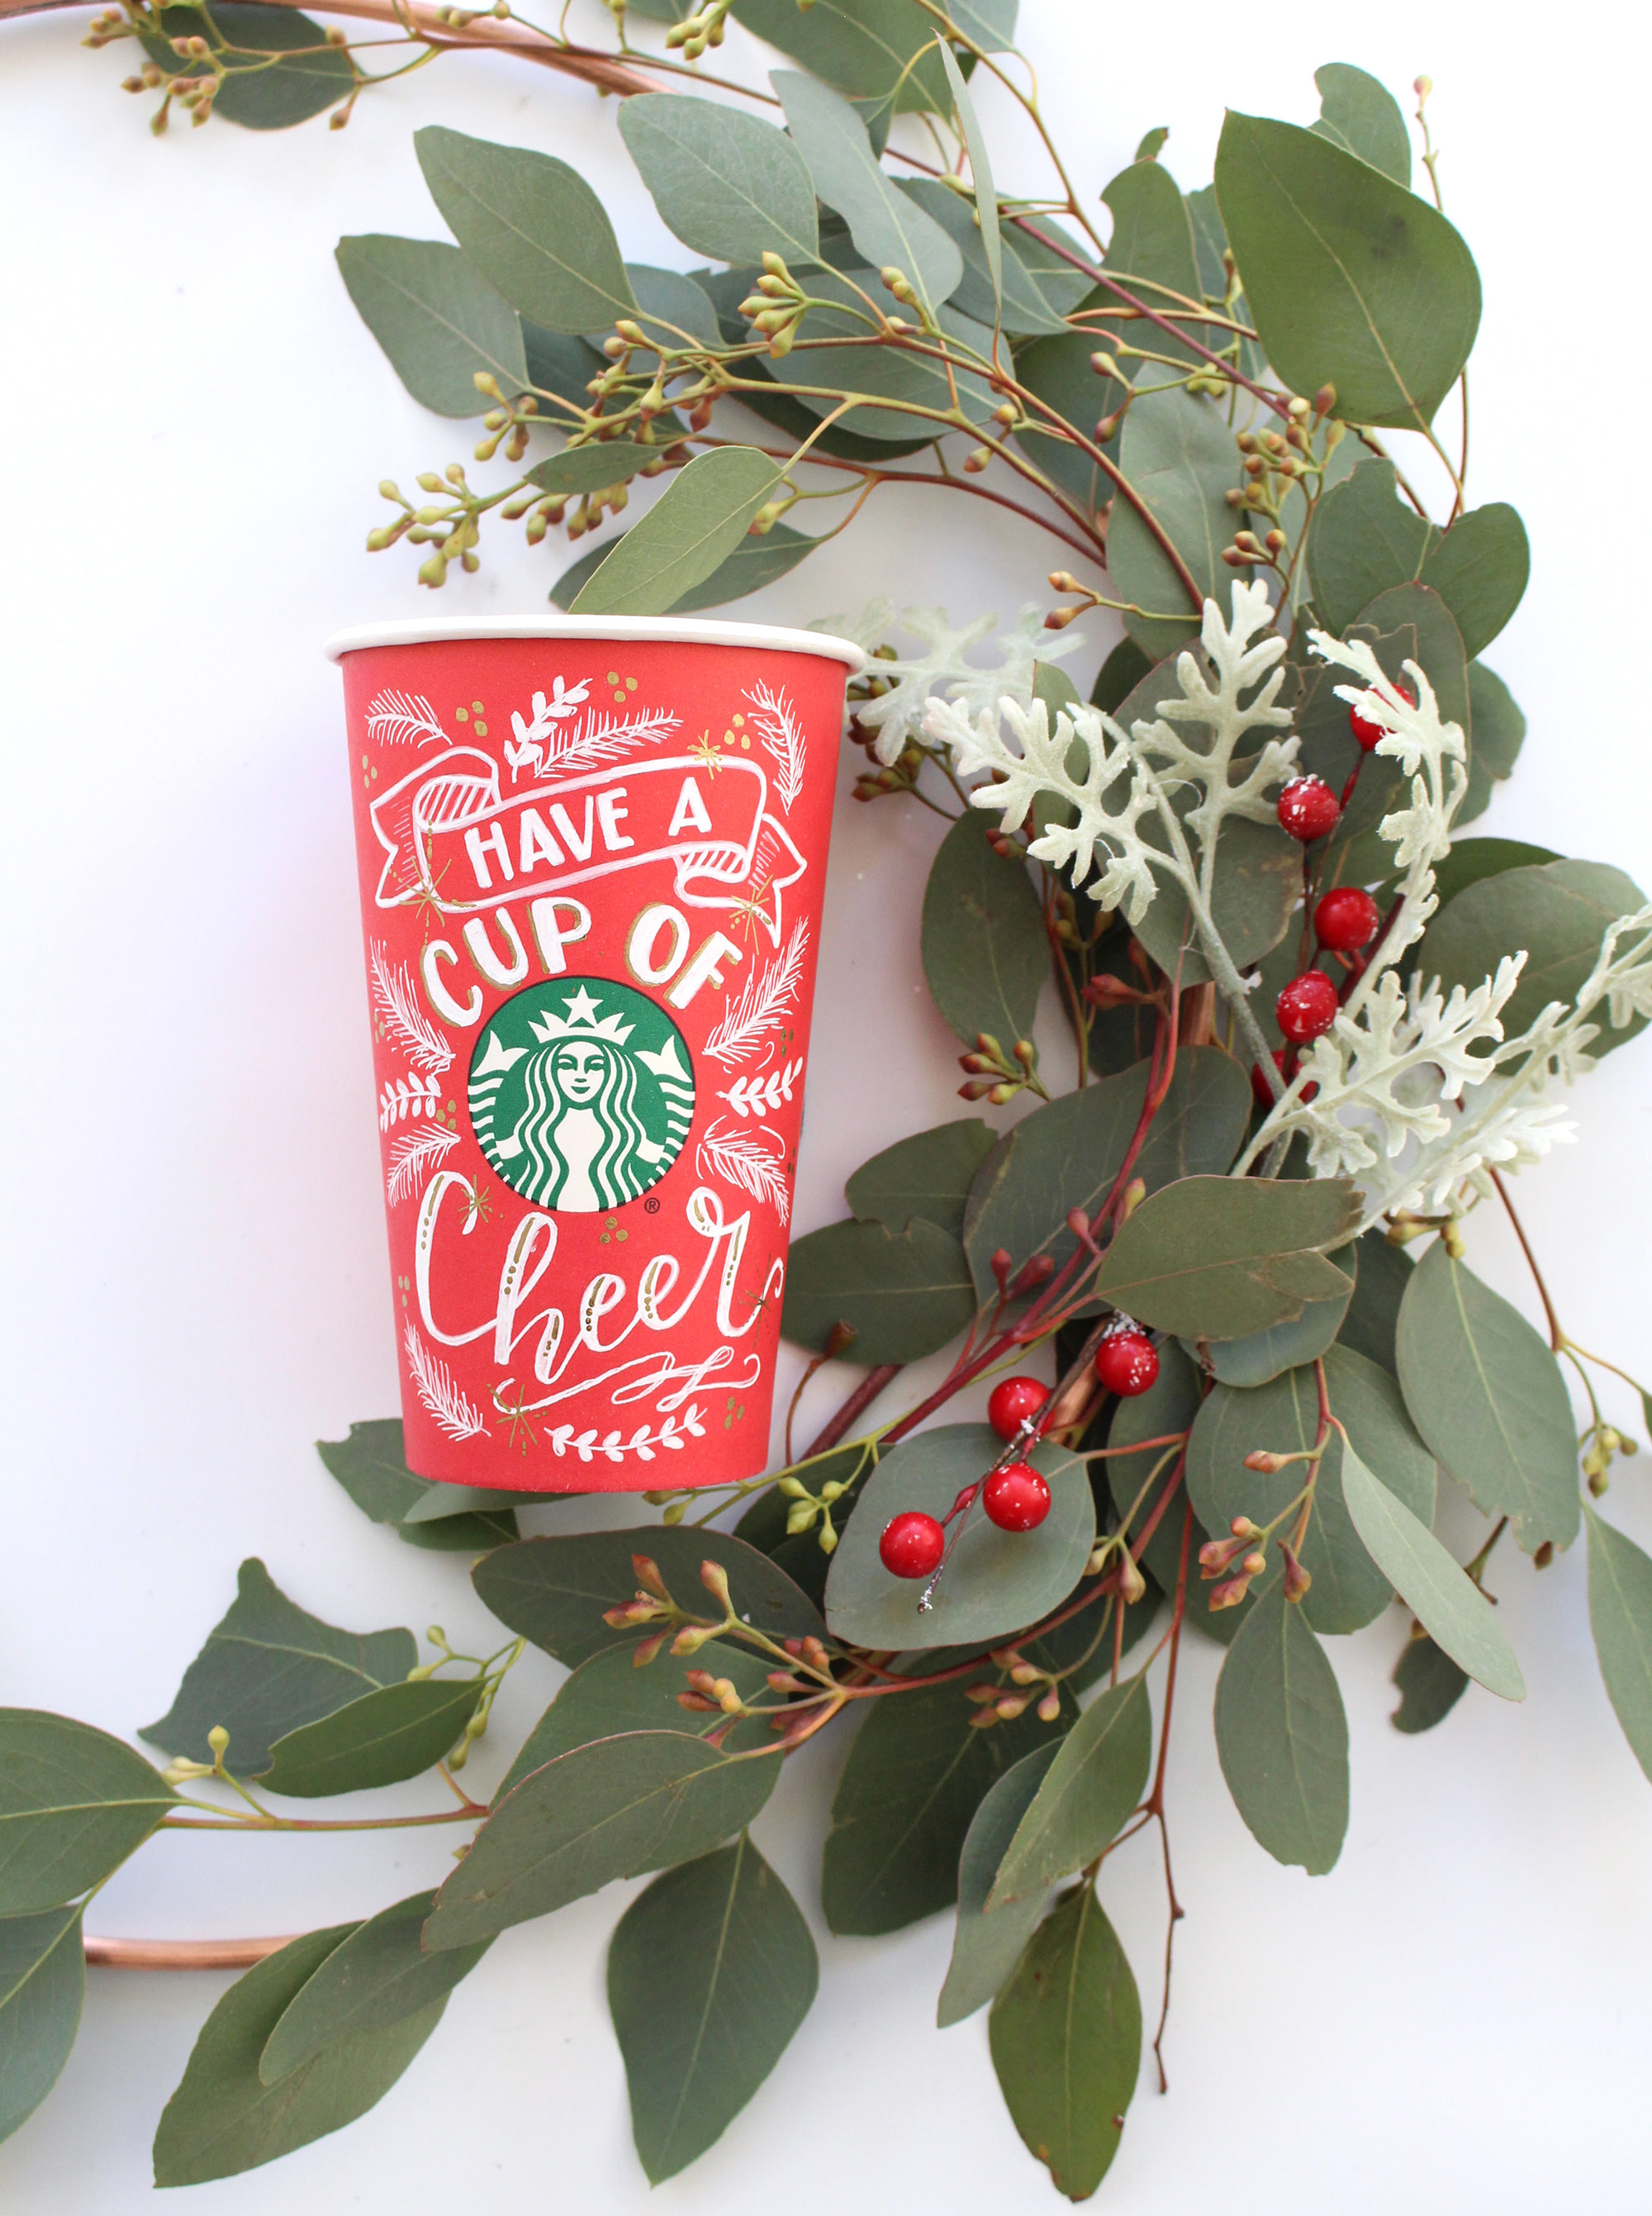 Starbucks is bringing back blank red cups on December 17th for you to add your own holiday flair! This cup was designed by Valerie McKeehan of Lily & Val. 